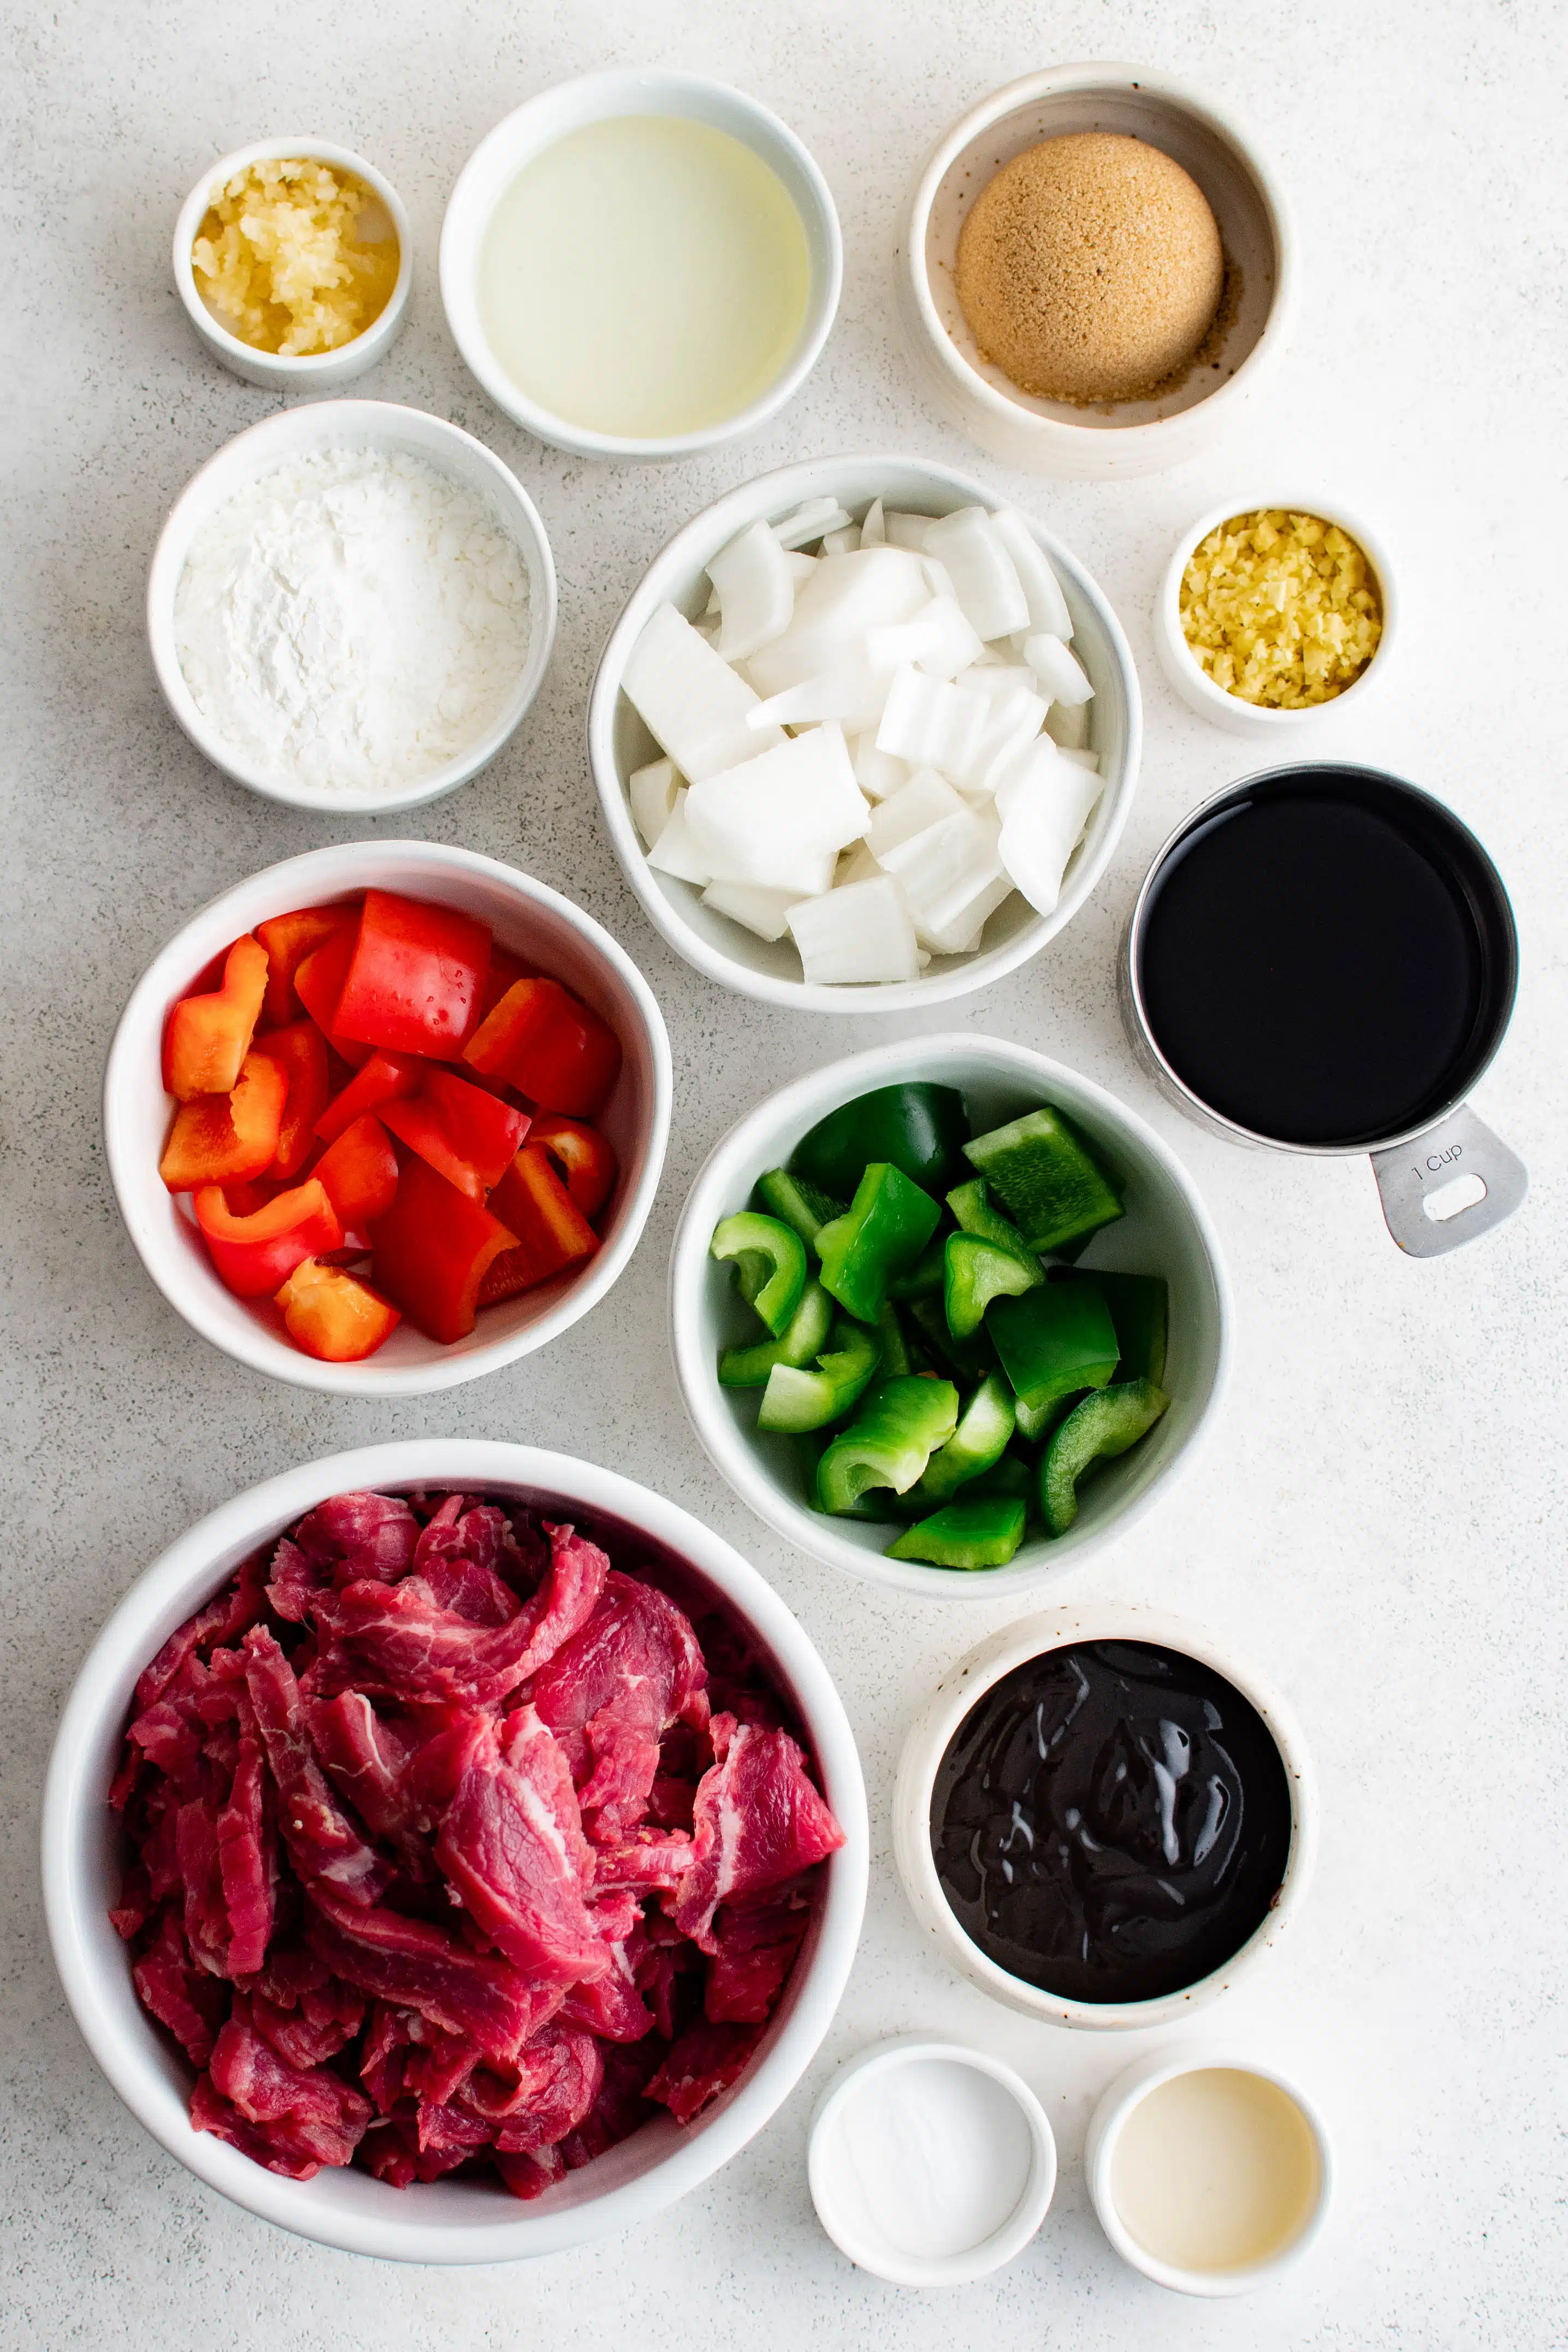 All of the ingredients required to make Mongolian beef set aside in individual serving dishes.